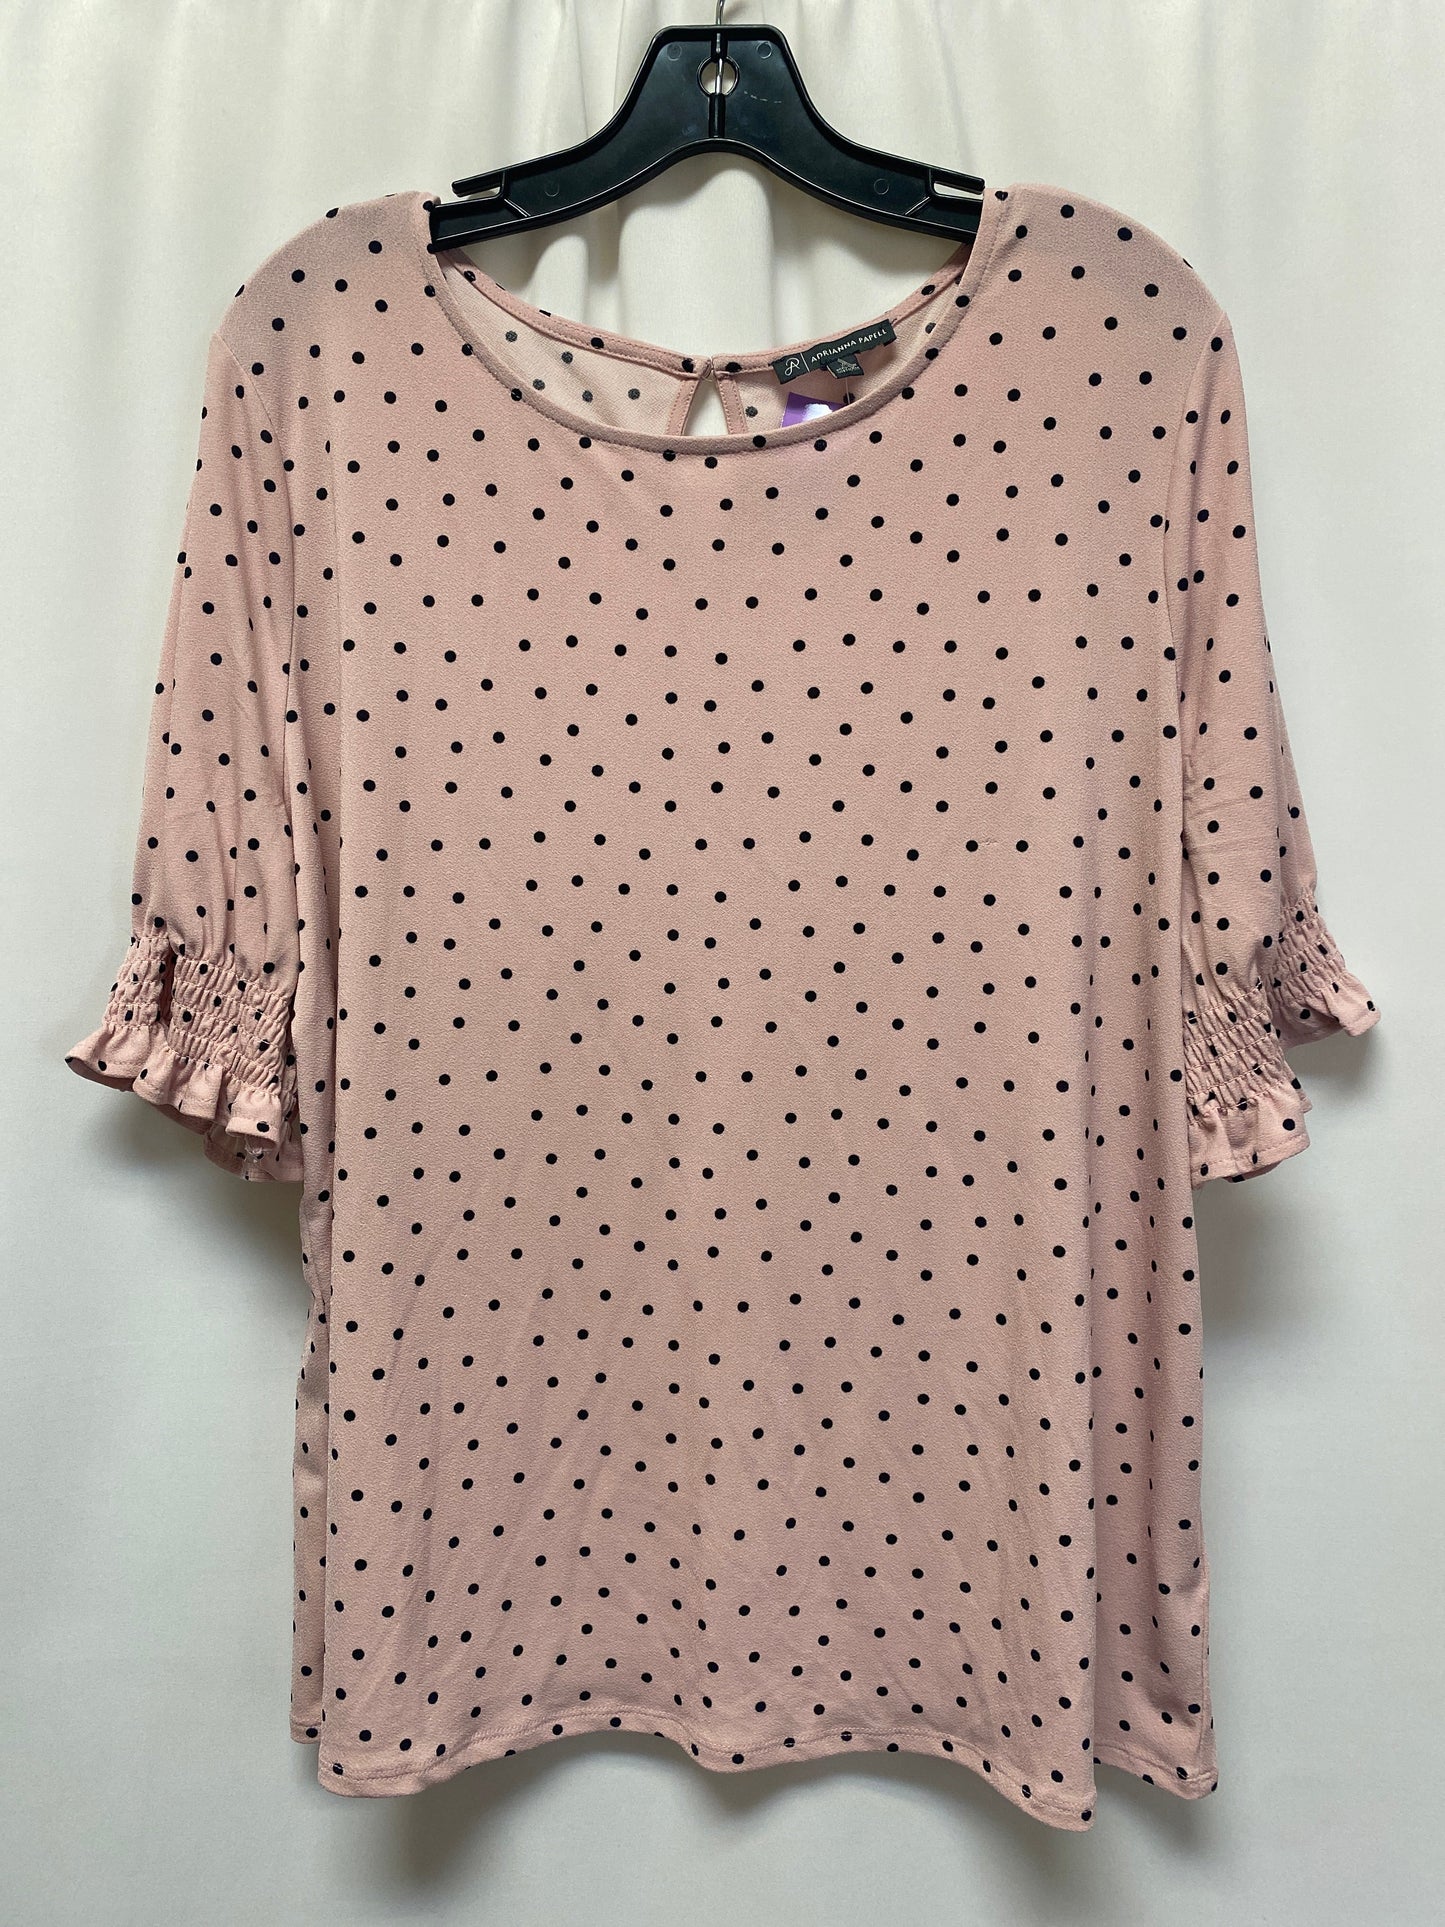 Pink Top Short Sleeve Adrianna Papell, Size Xl